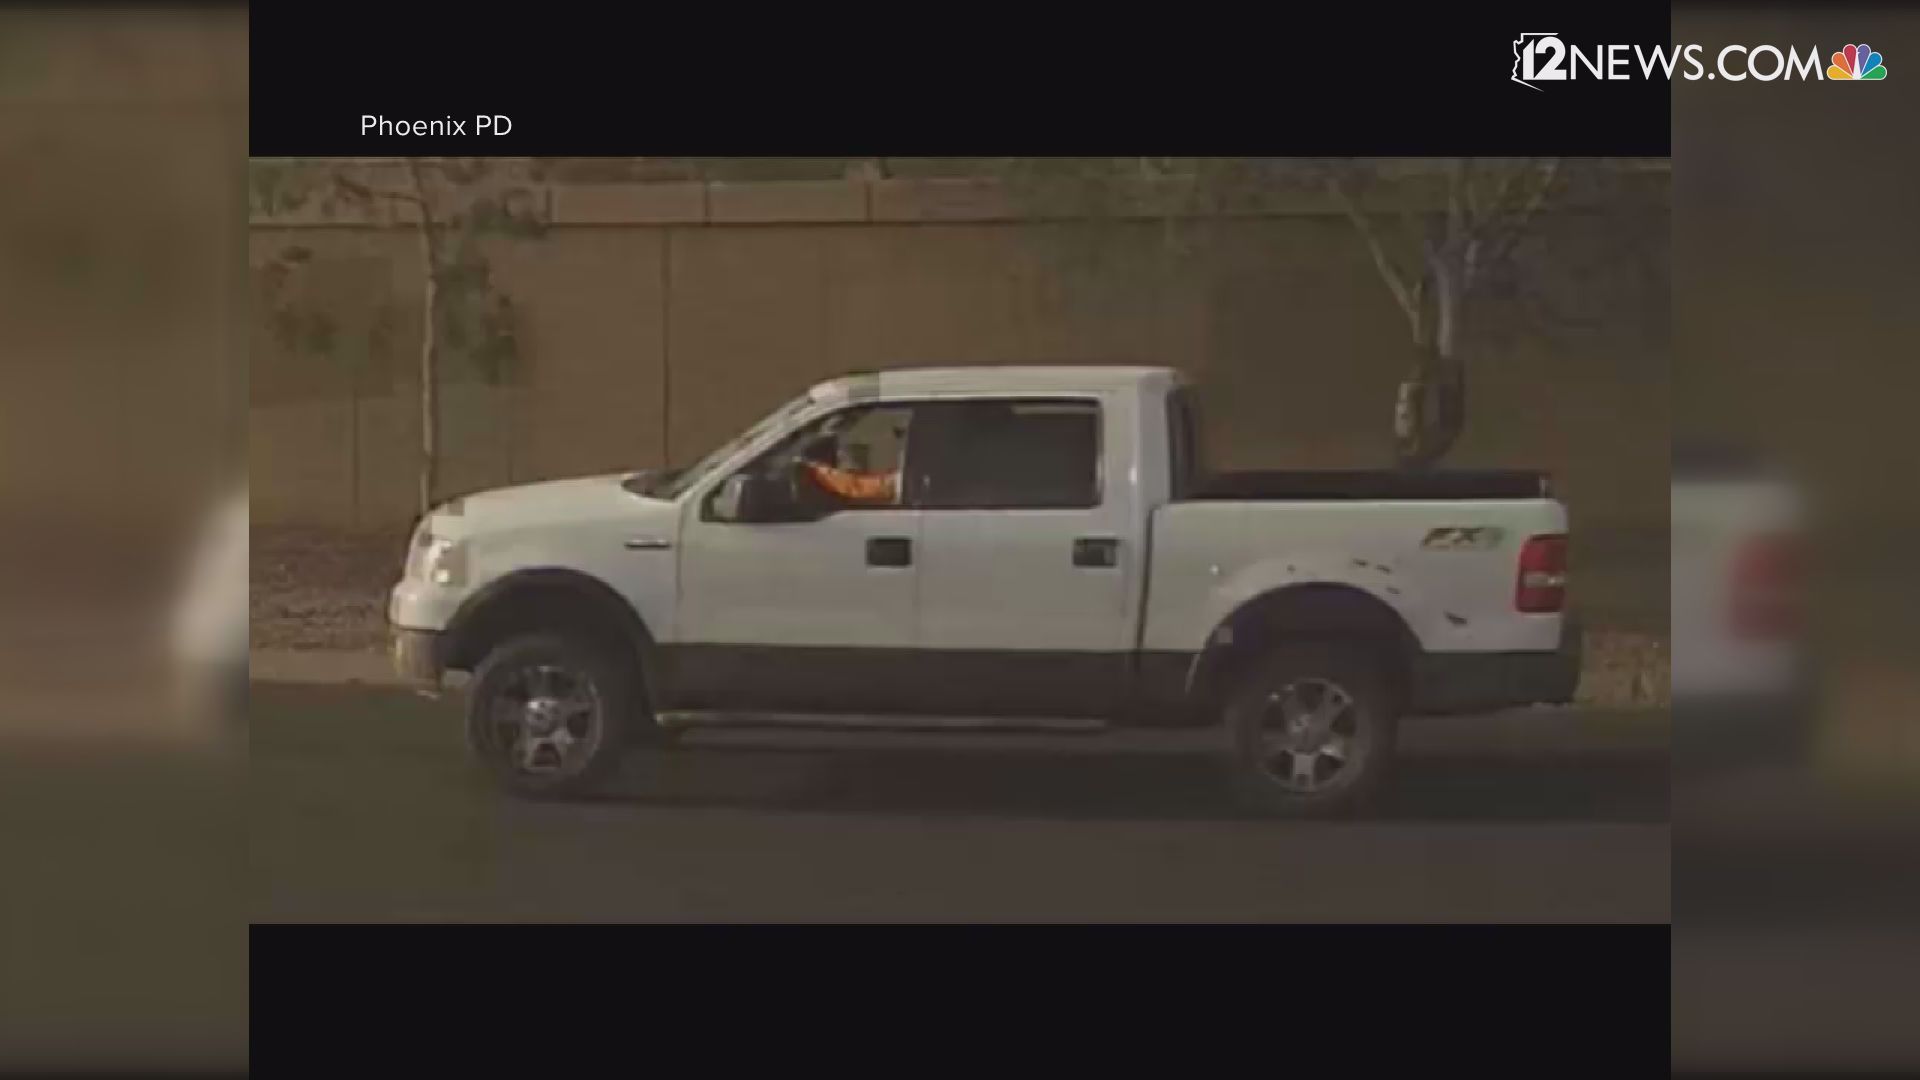 A 10-year-old girl who was shot Wednesday has died and the suspect is still on the loose, Phoenix police said Thursday. Police said a white four-door Ford F-150 pickup truck closely followed the girl's family as they drove home. The driver of the pickup truck fired several shots at their vehicle after they pulled into the driveway, according to police.